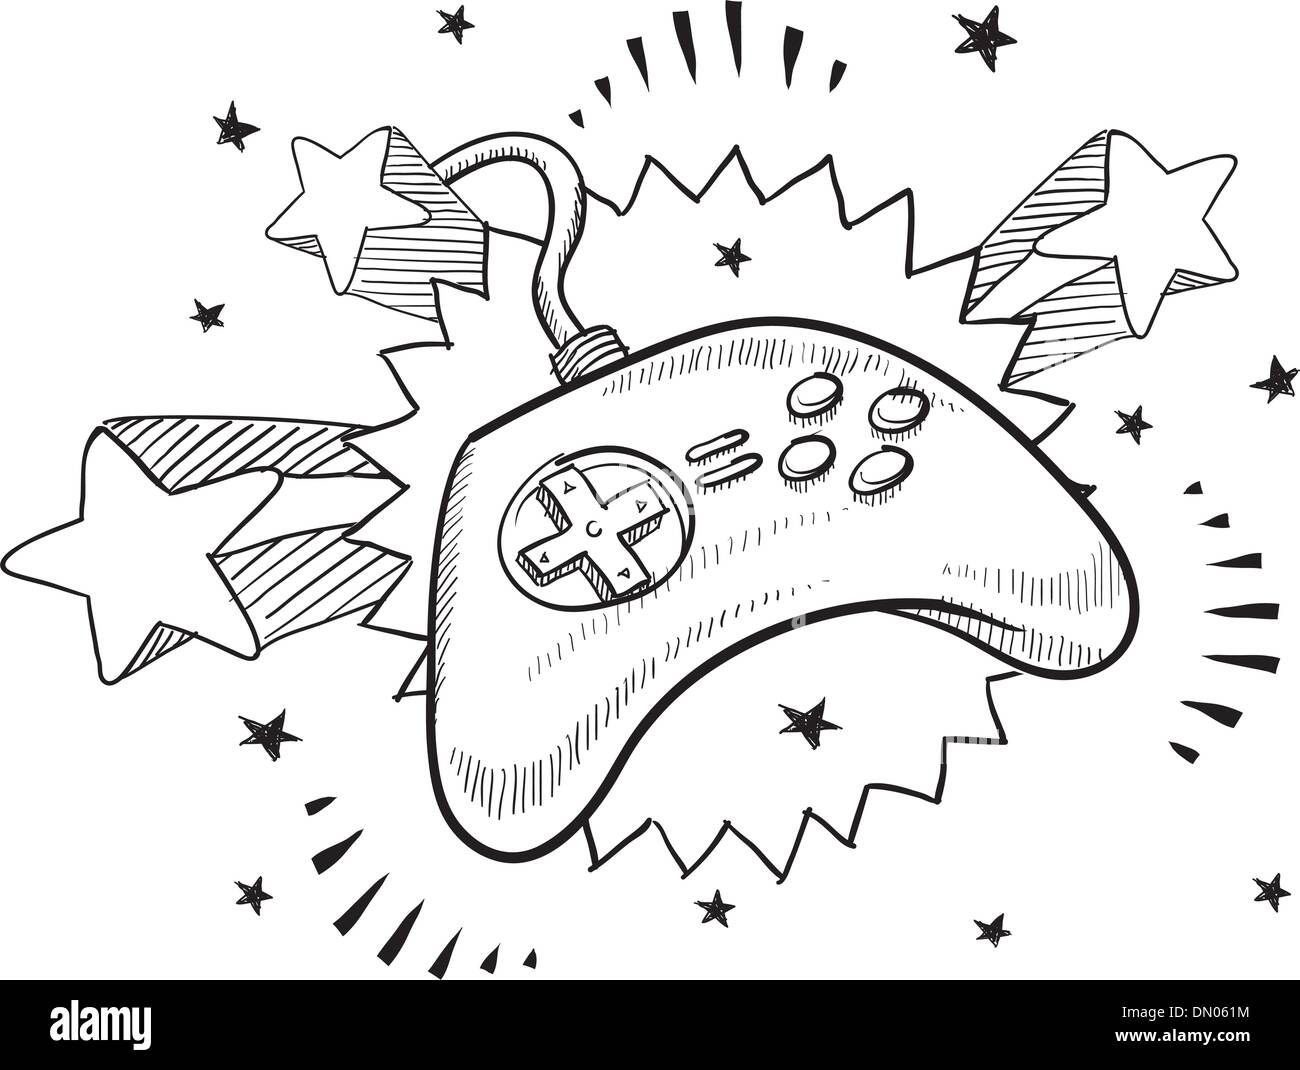 1,400+ Gamer Sketch Stock Photos, Pictures & Royalty-Free Images - iStock